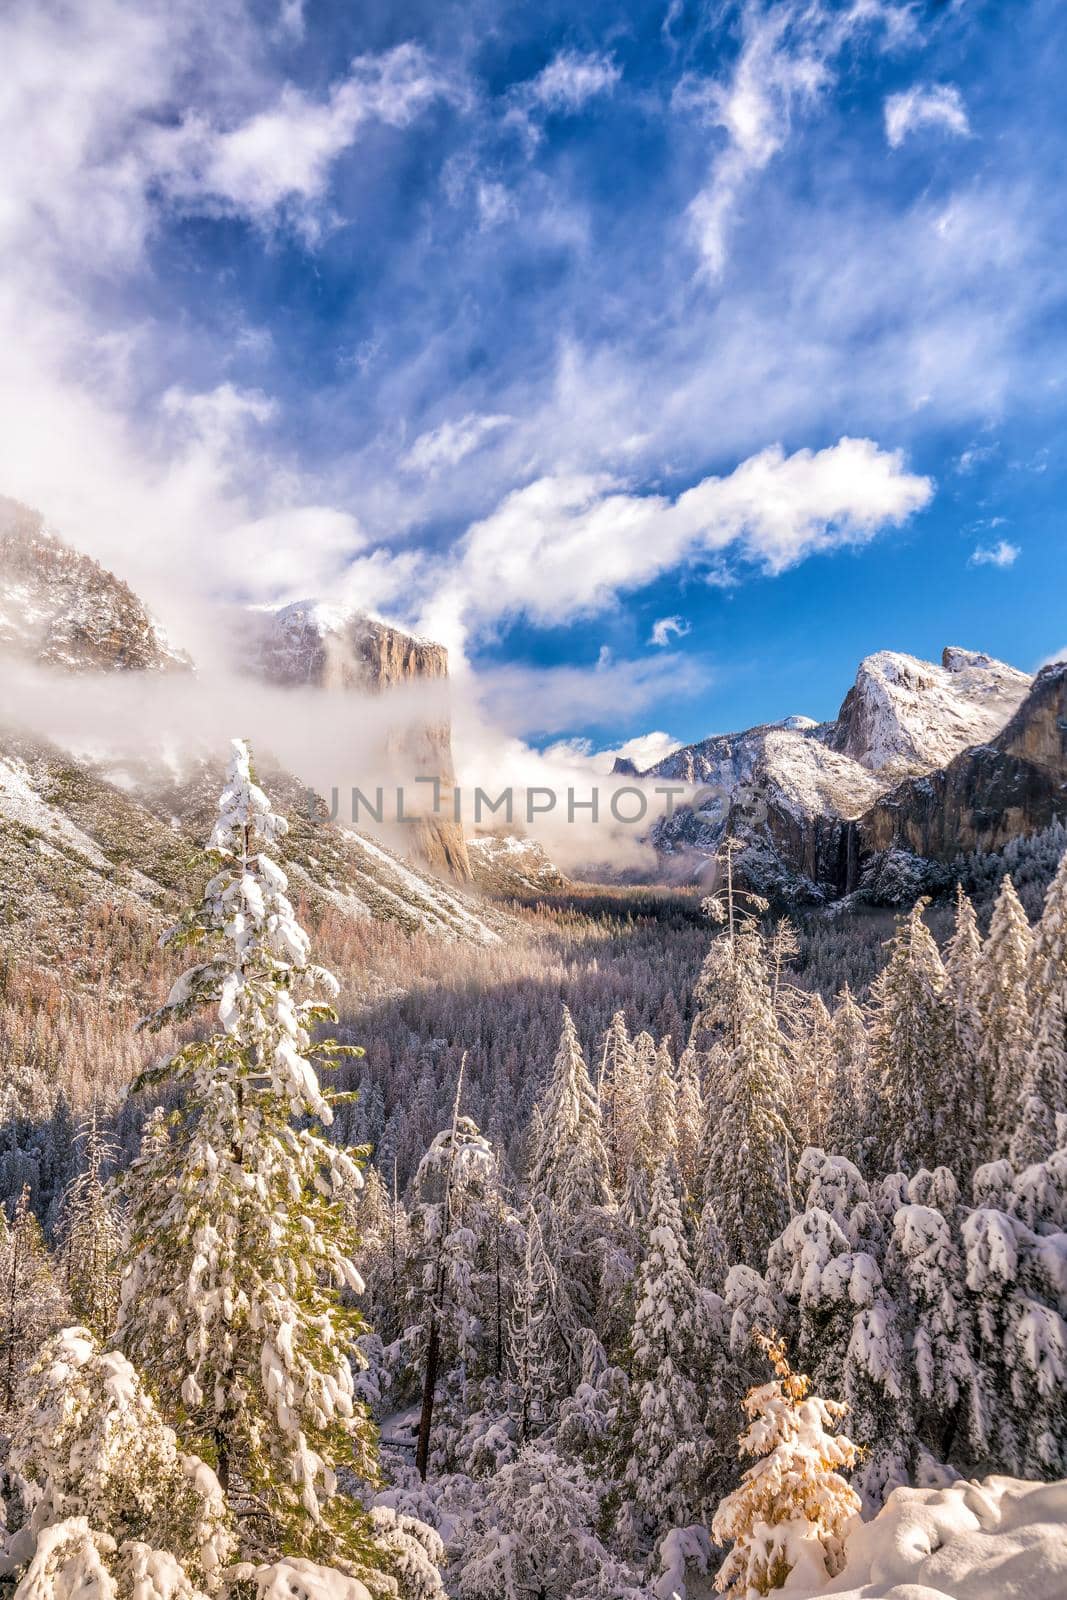 Yosemite National Park in winter by f11photo